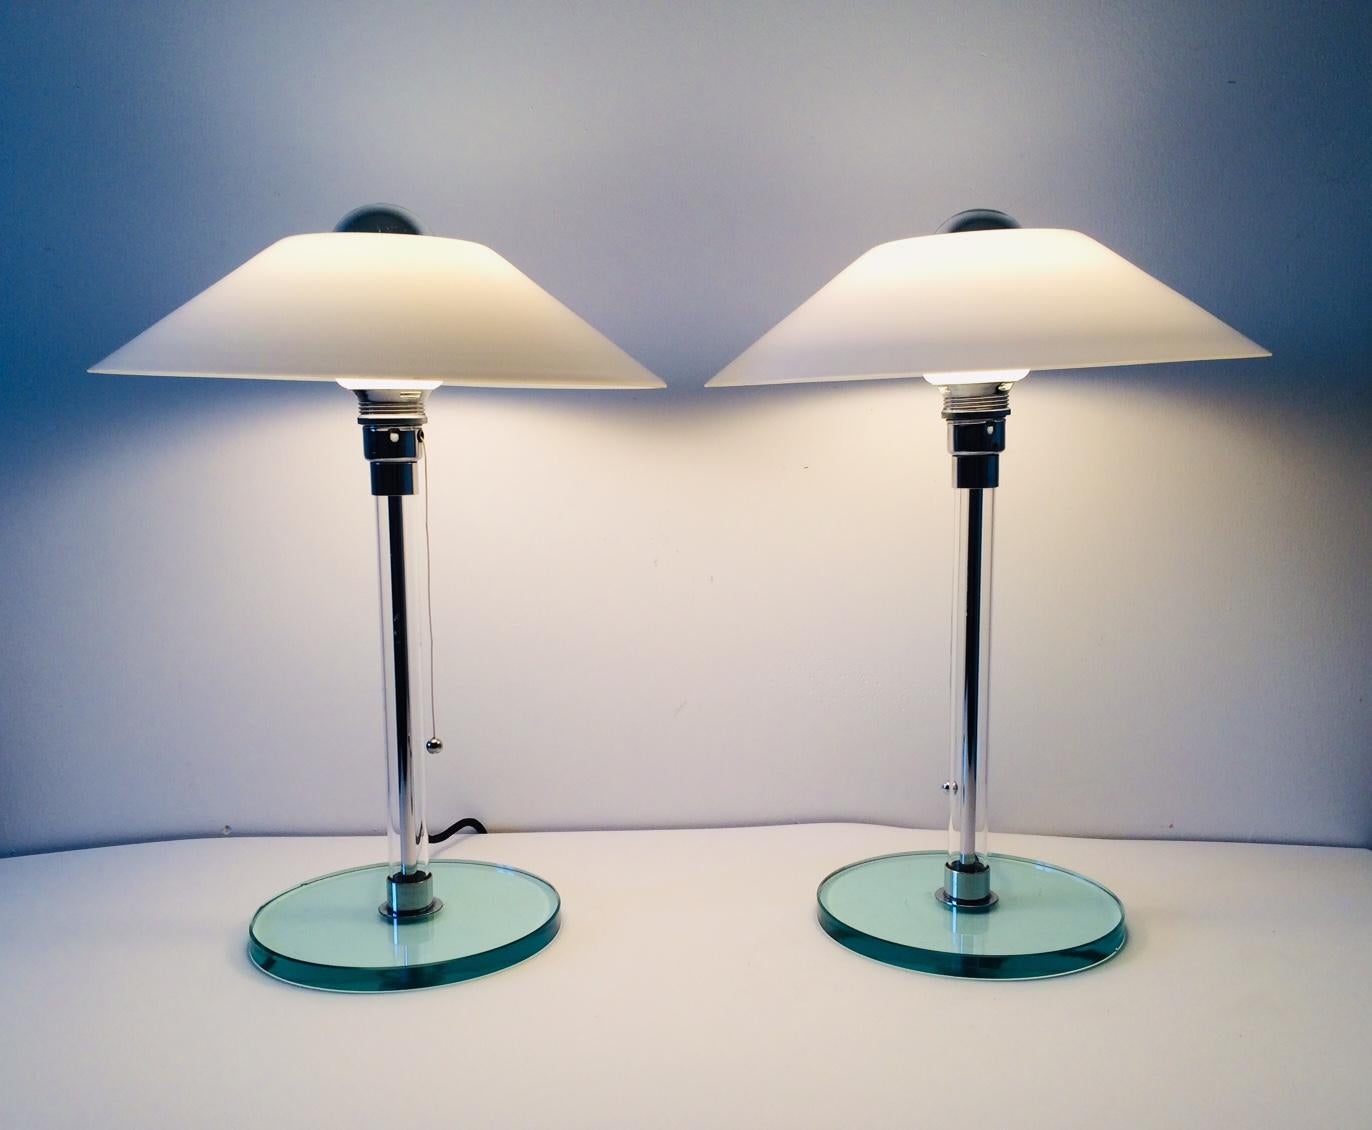 Vintage Post Modern Design set of 2 table lamp or desk lamps in glass with metal fittings. Made in Italy, 1980's. In the style of Poulsen lamp design. Art Deco in style and form. Superb high quality design lamps. Rare model. All glass construction